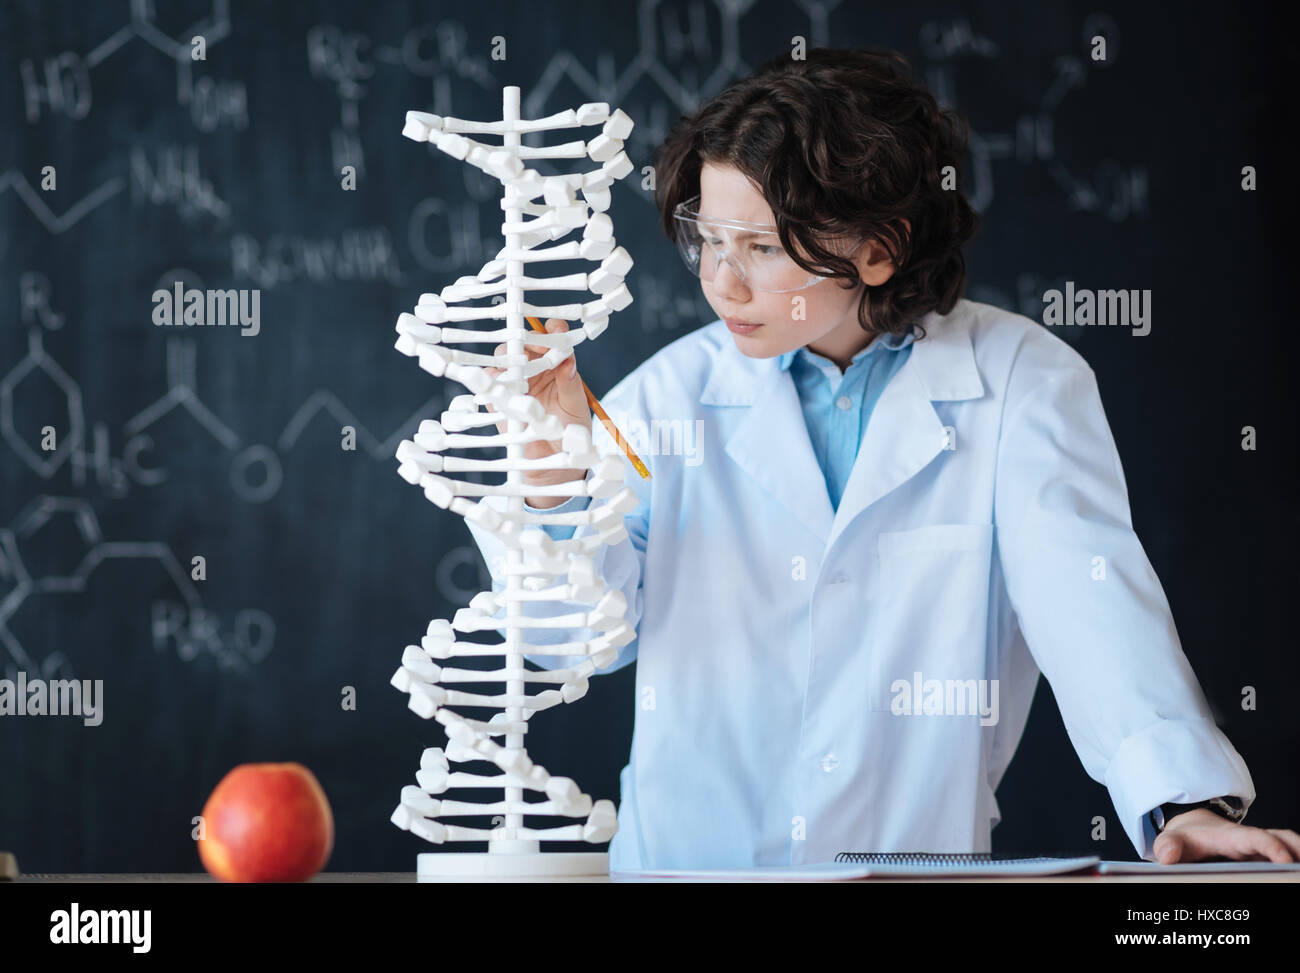 Capable young researcher exploring genomics in the laboratory Stock Photo